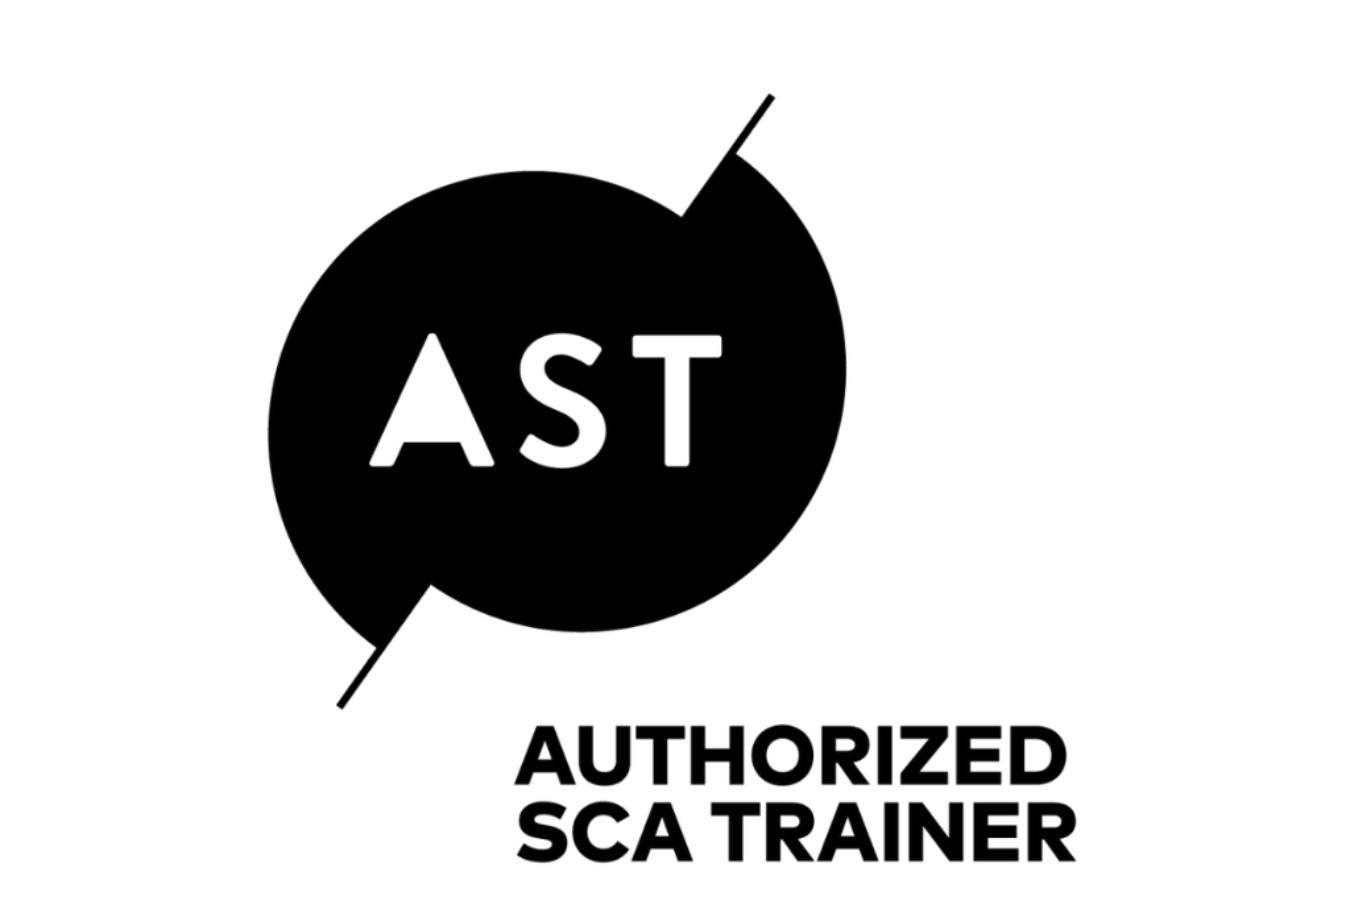 Authorized SCA Trainers